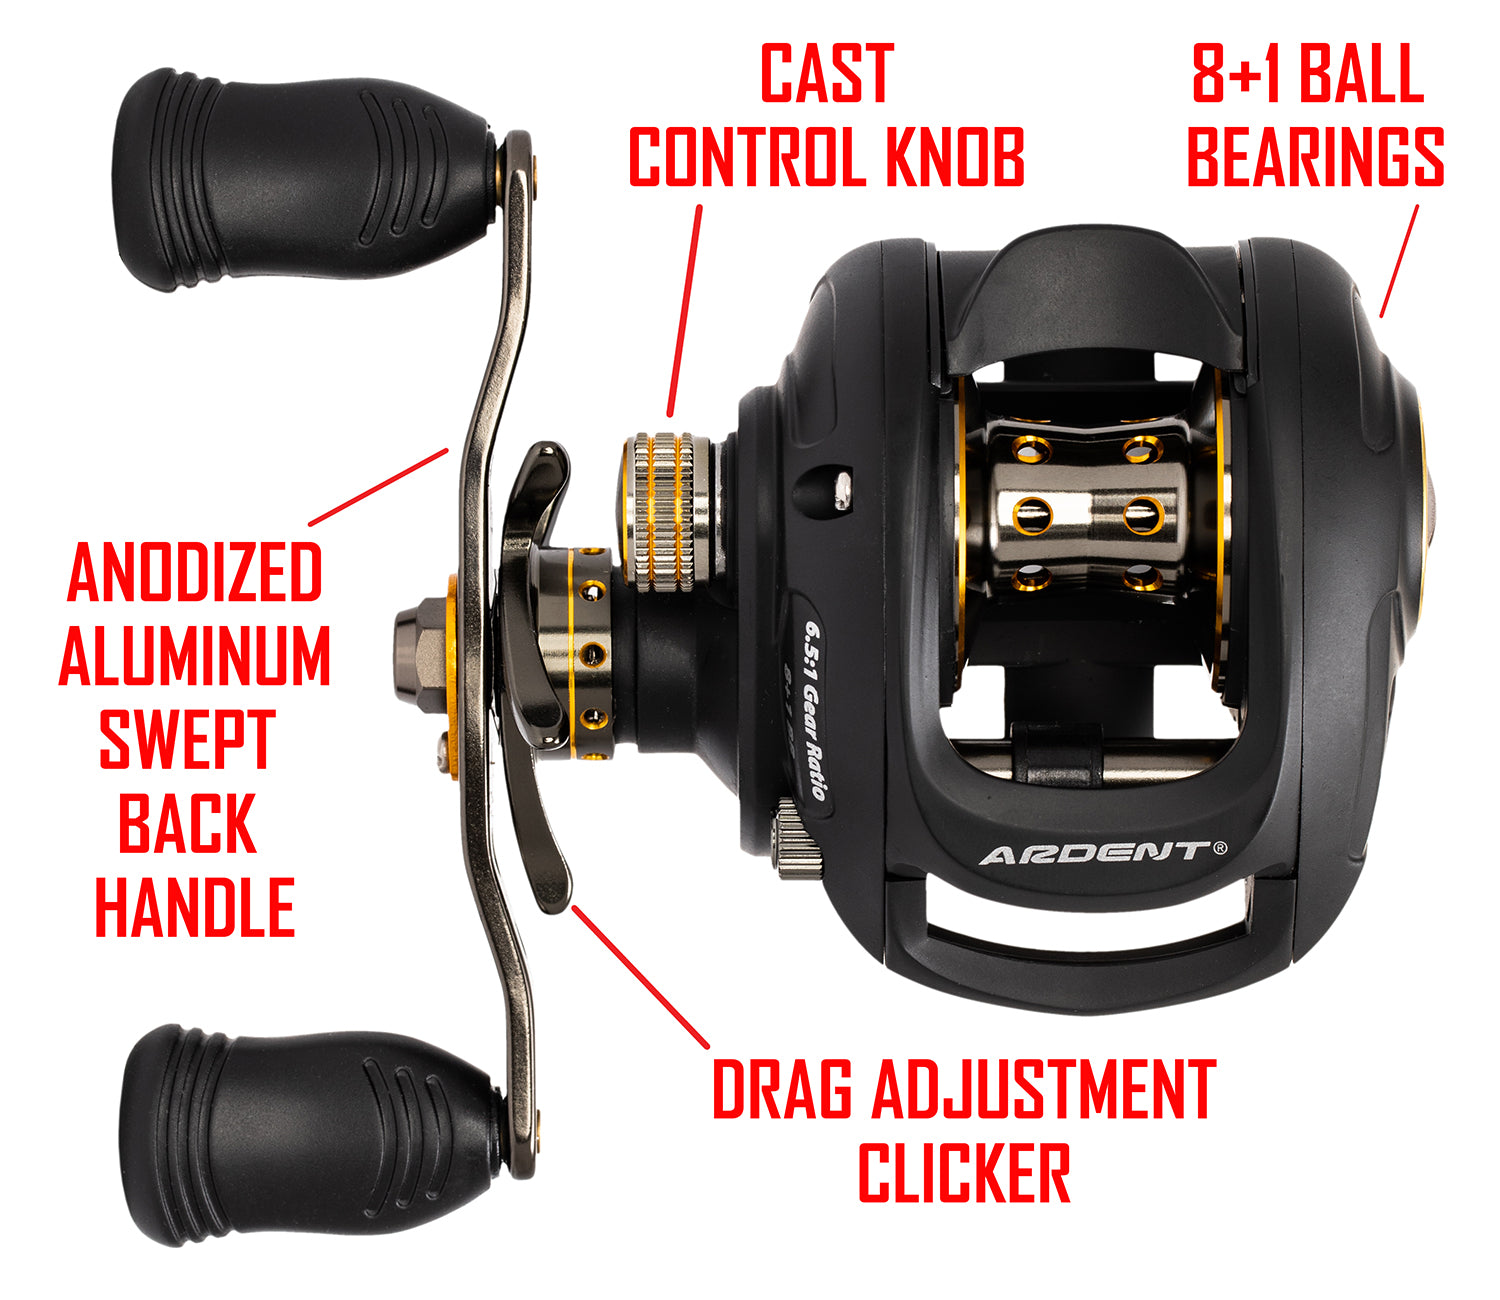 Black APEX TOURNAMENT Baitcaster with red text. text:  CAST CONTROL KNOB 8+1 BALL BEARINGS ANODIZED ALUMINUM  SWEPT BACK HANDLE DRAG ADJUSTMENT CLICKER